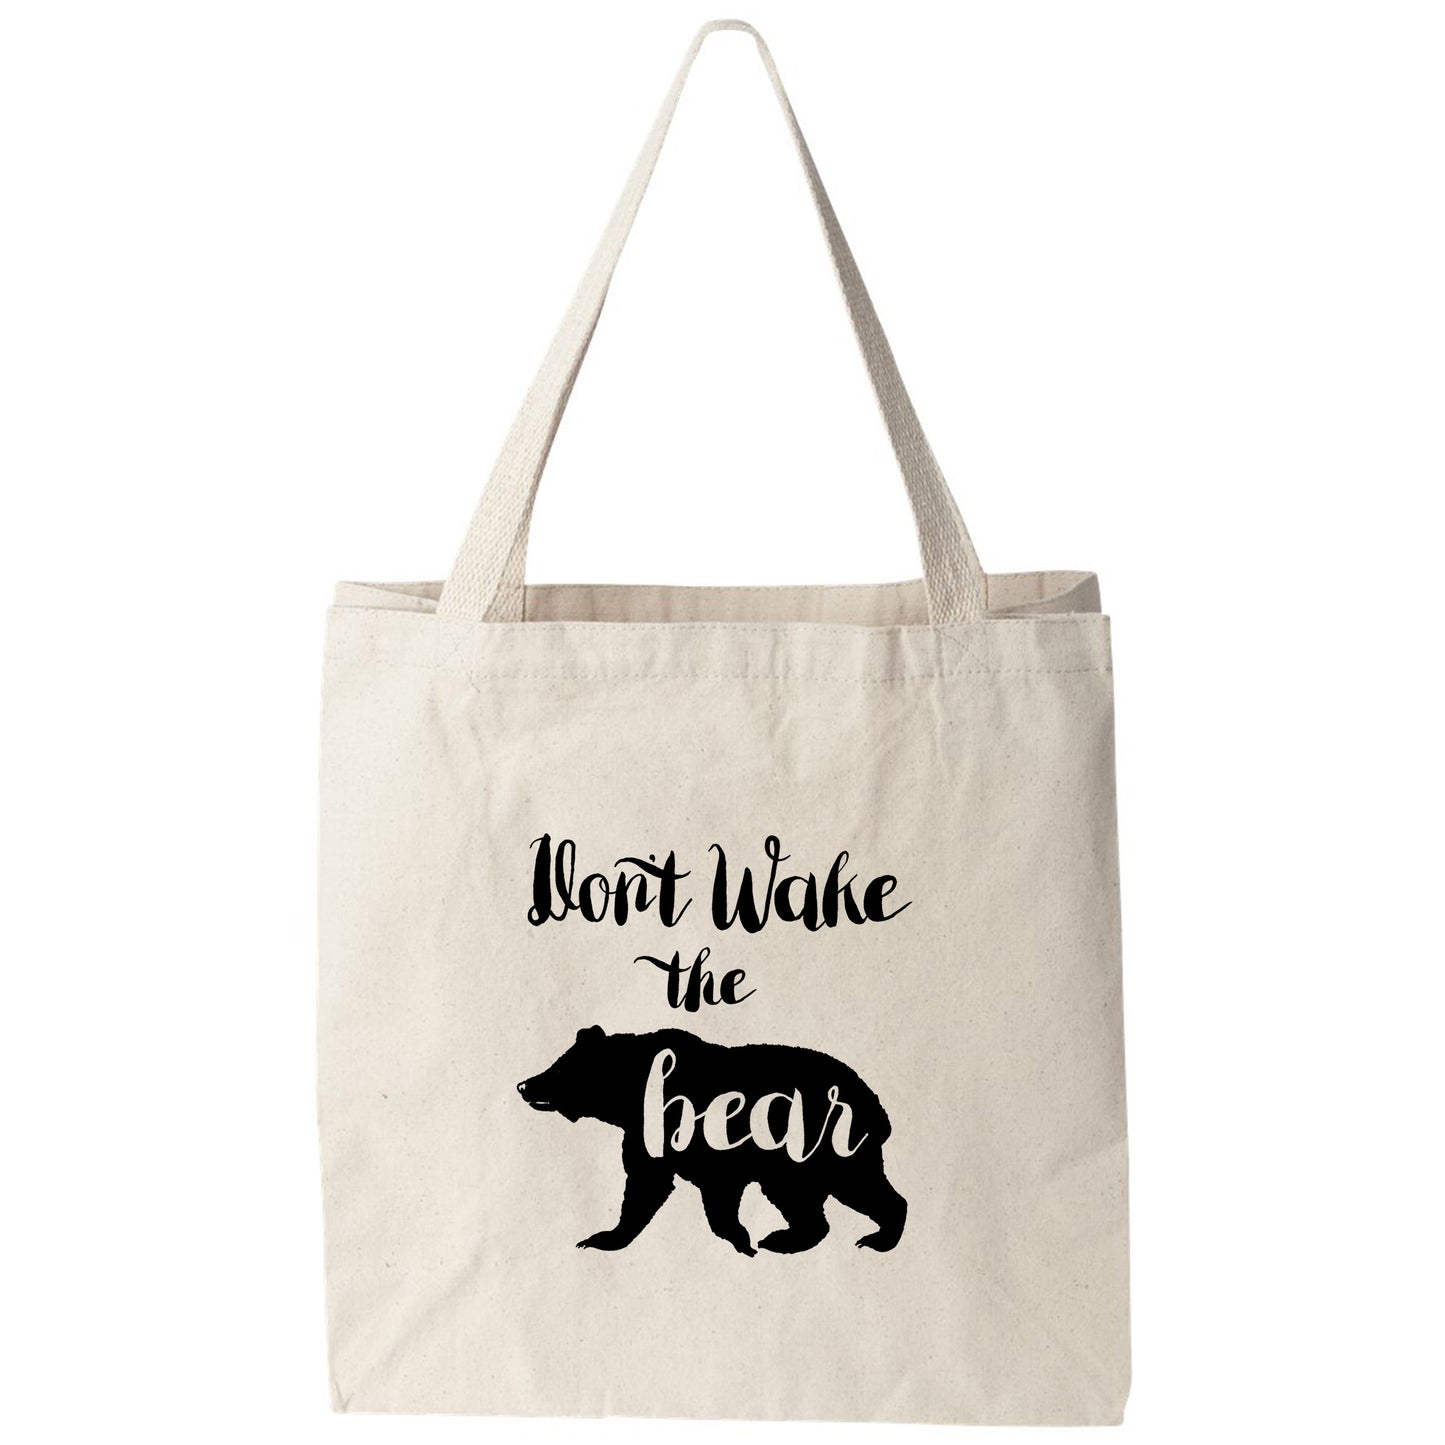 a tote bag that says don't wake the bear